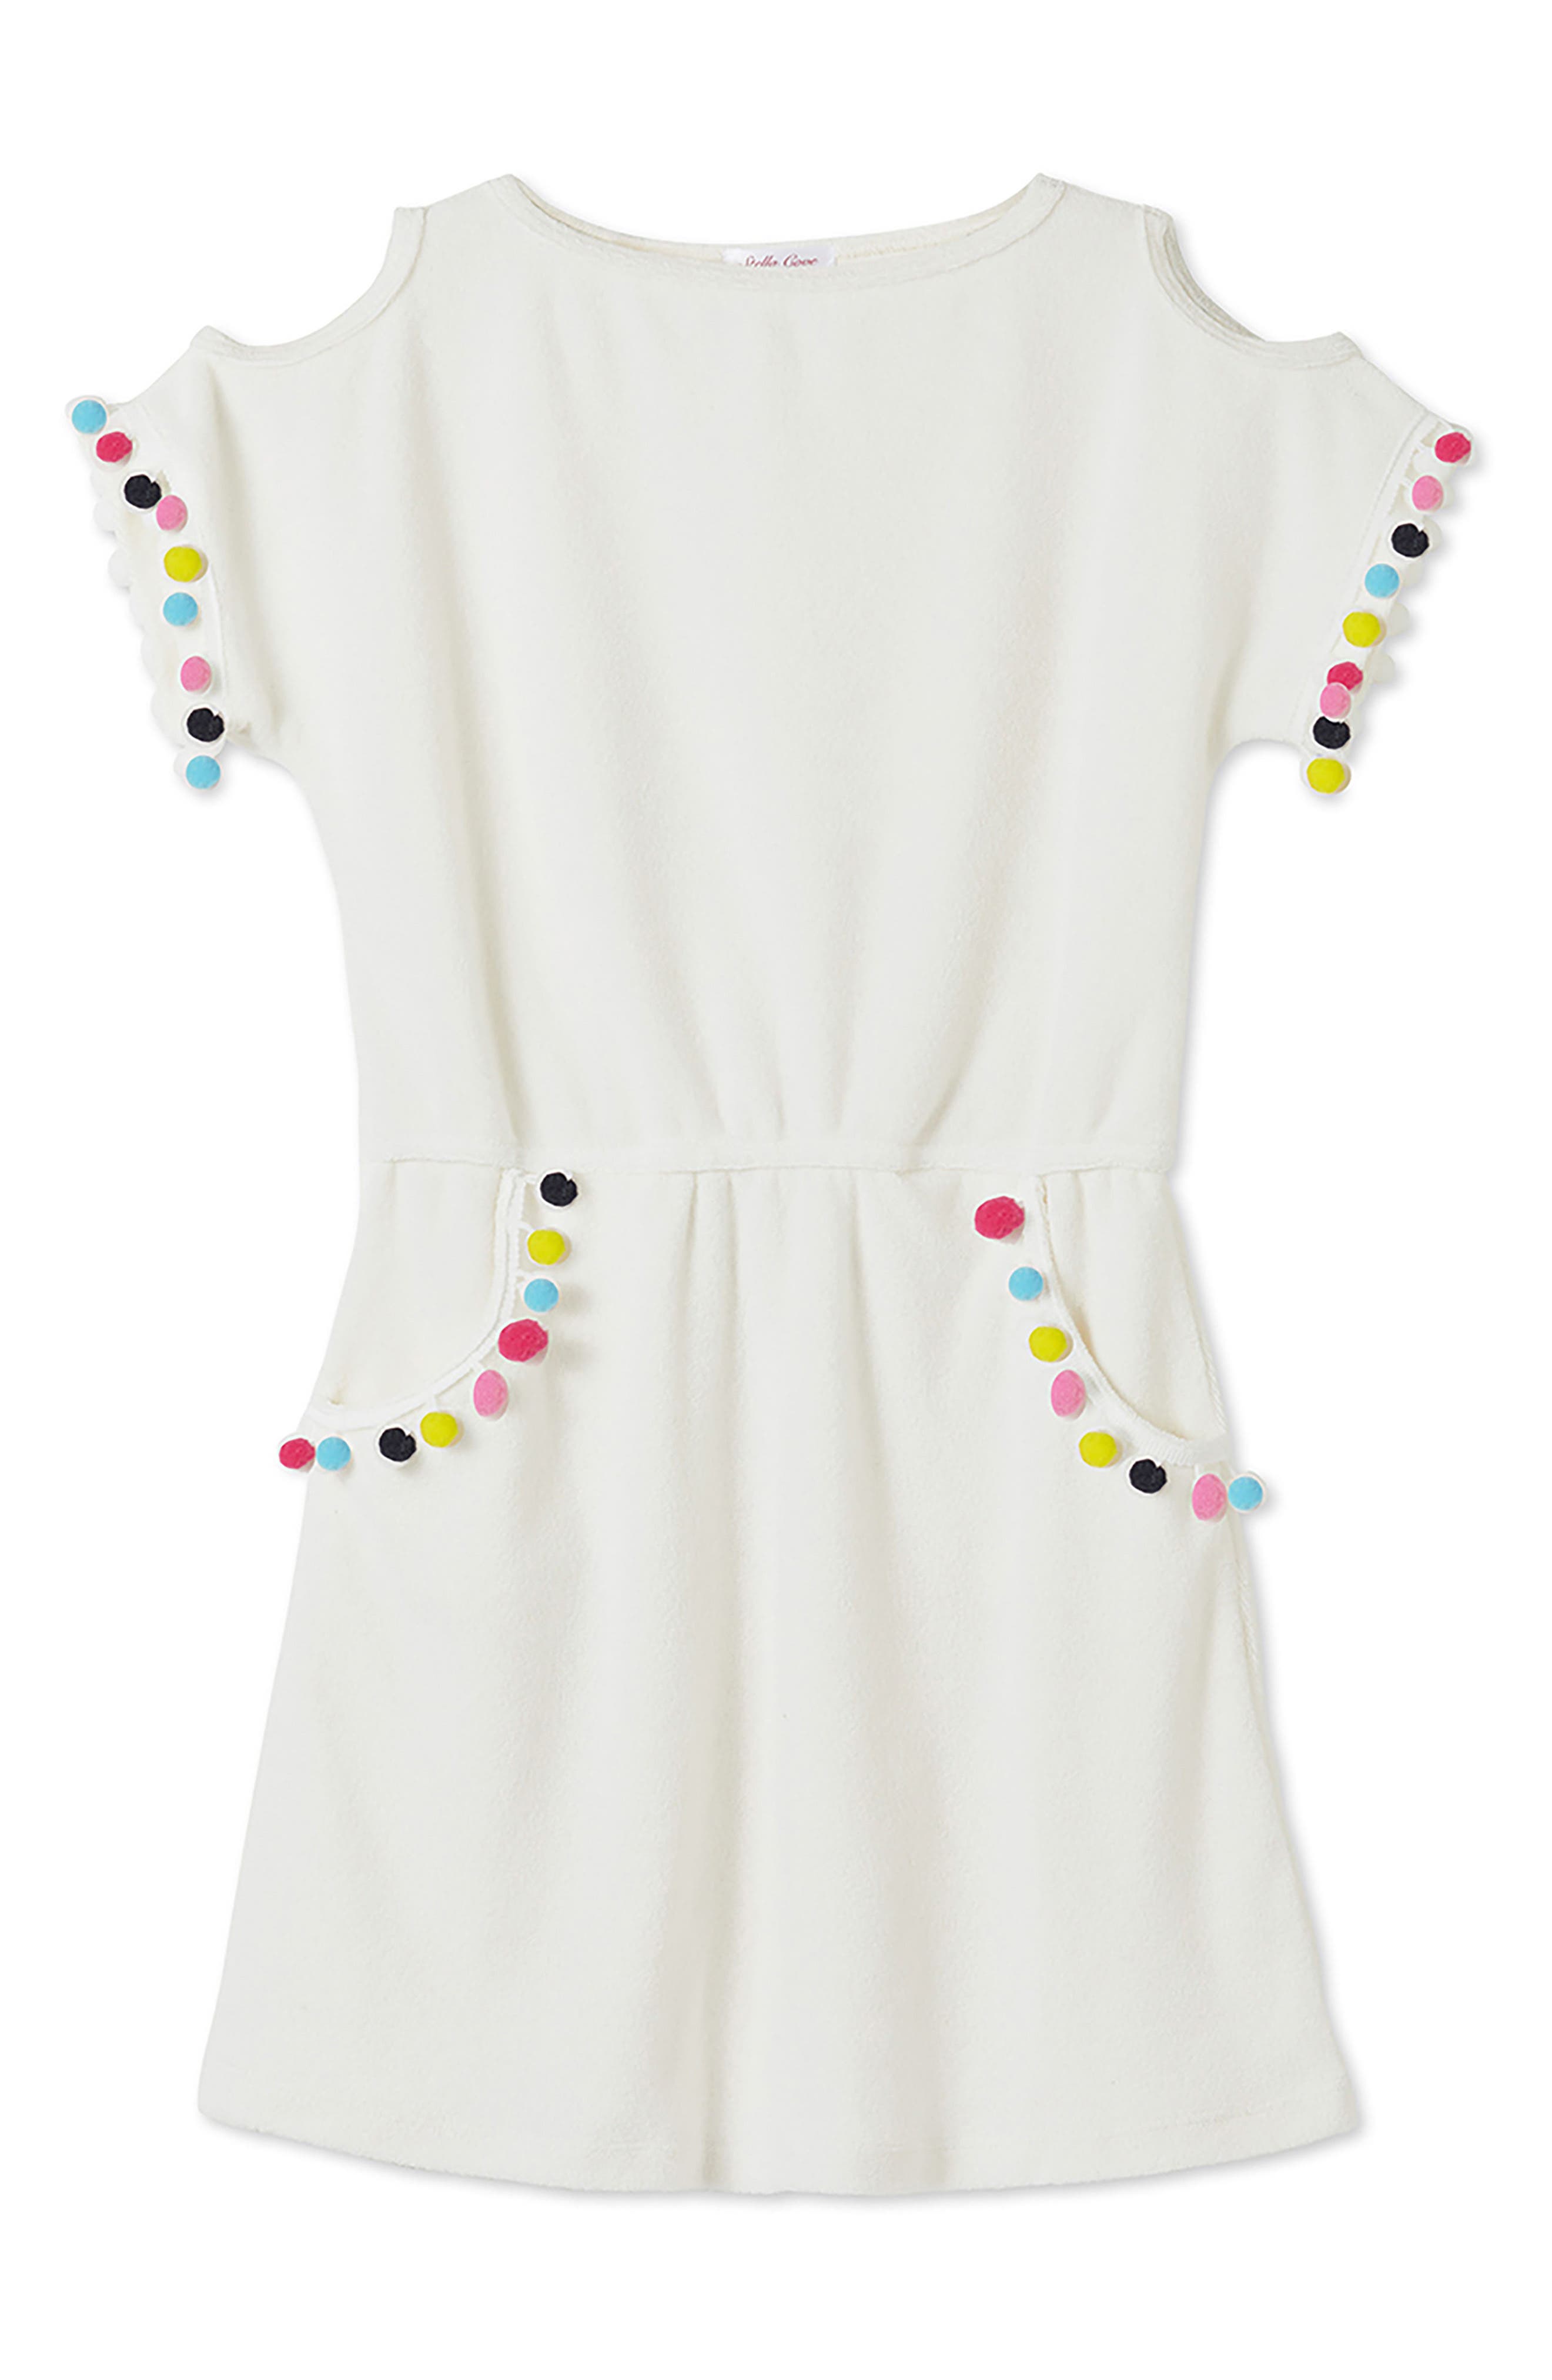 white dress with colorful pom poms